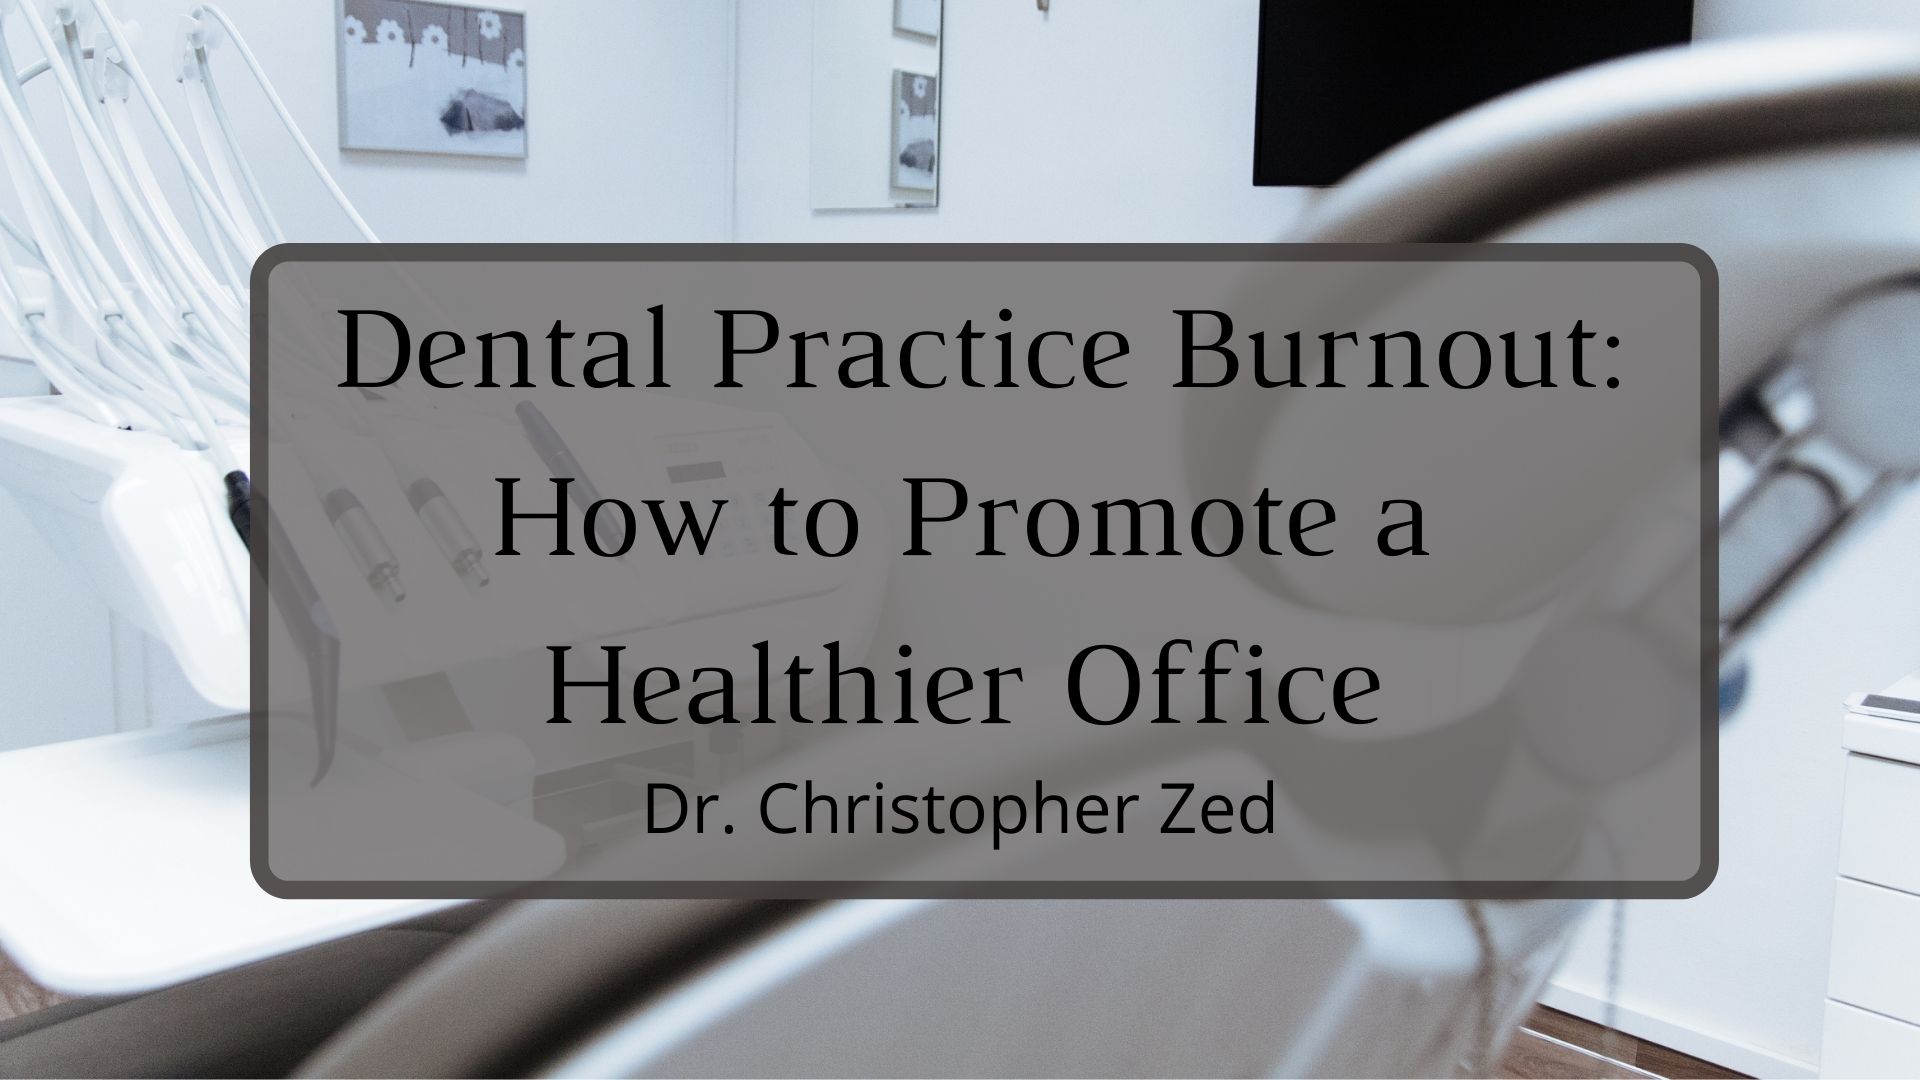 Dr. Christopher Zed Dental Practice Burnout_ How to Promote a Healthier Office